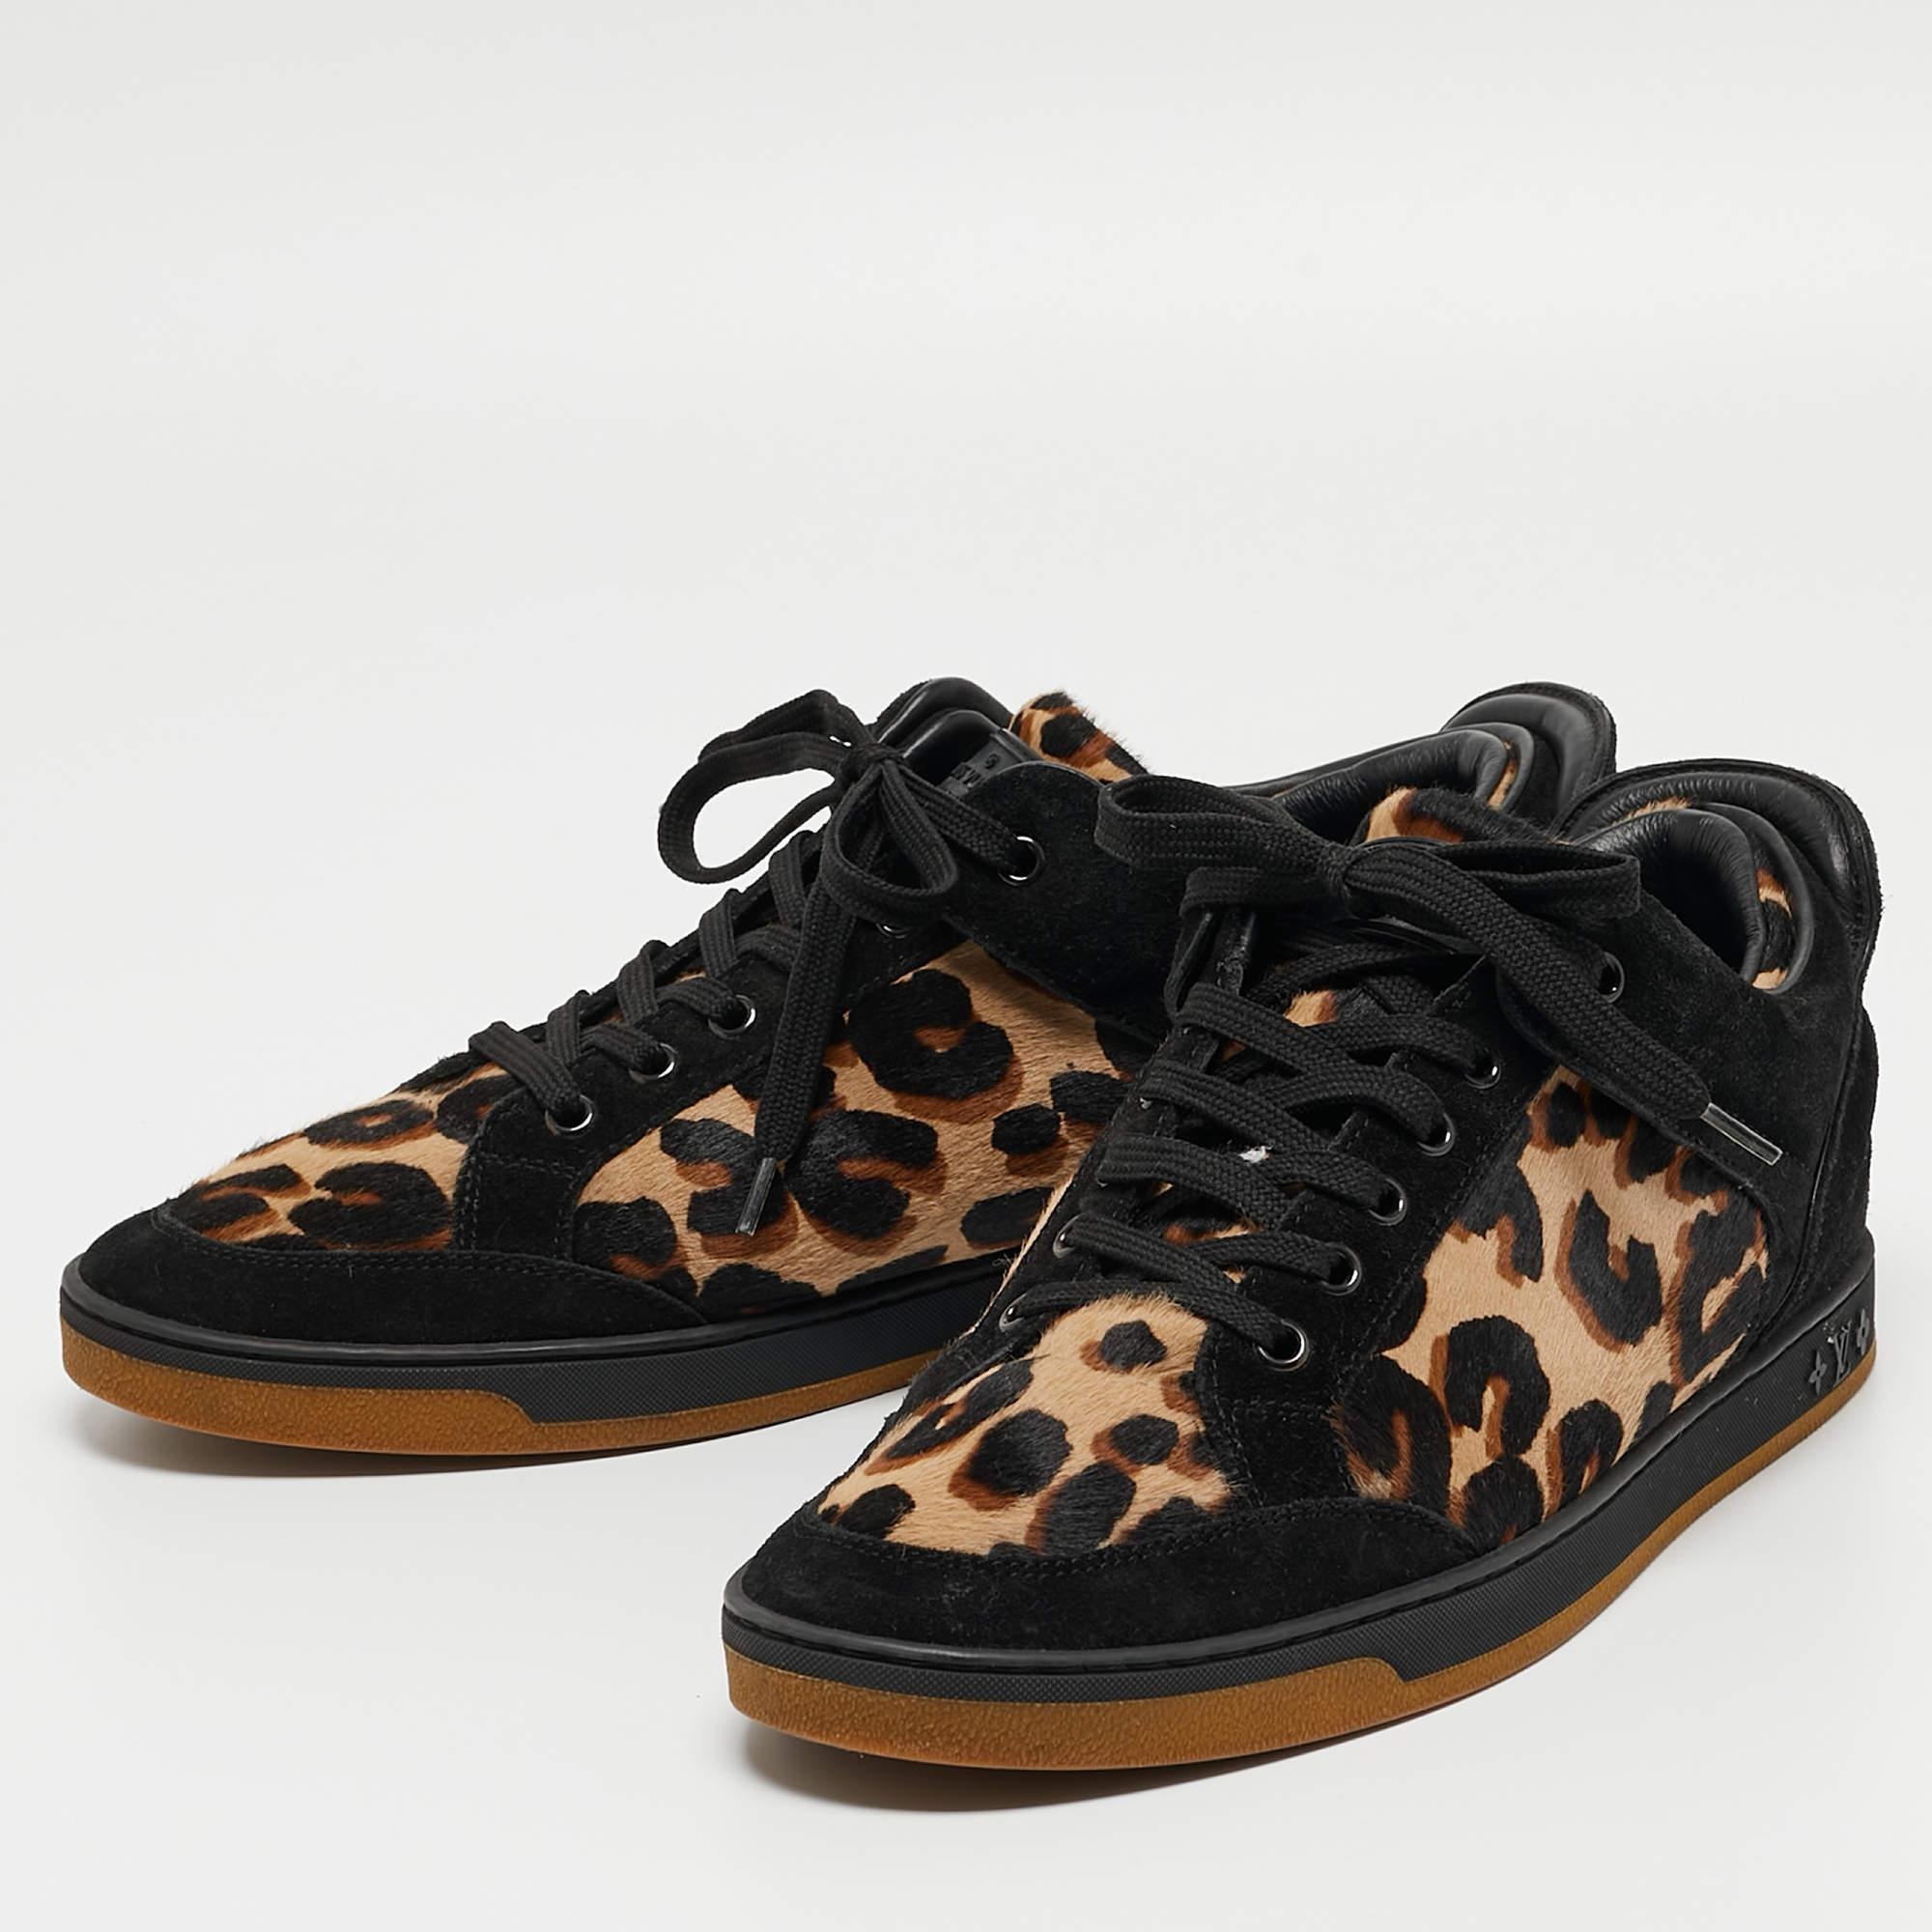 Louis Vuitton Black/Brown Calf Hair and Suede Low Top Sneakers Size 38.5 For Sale 5